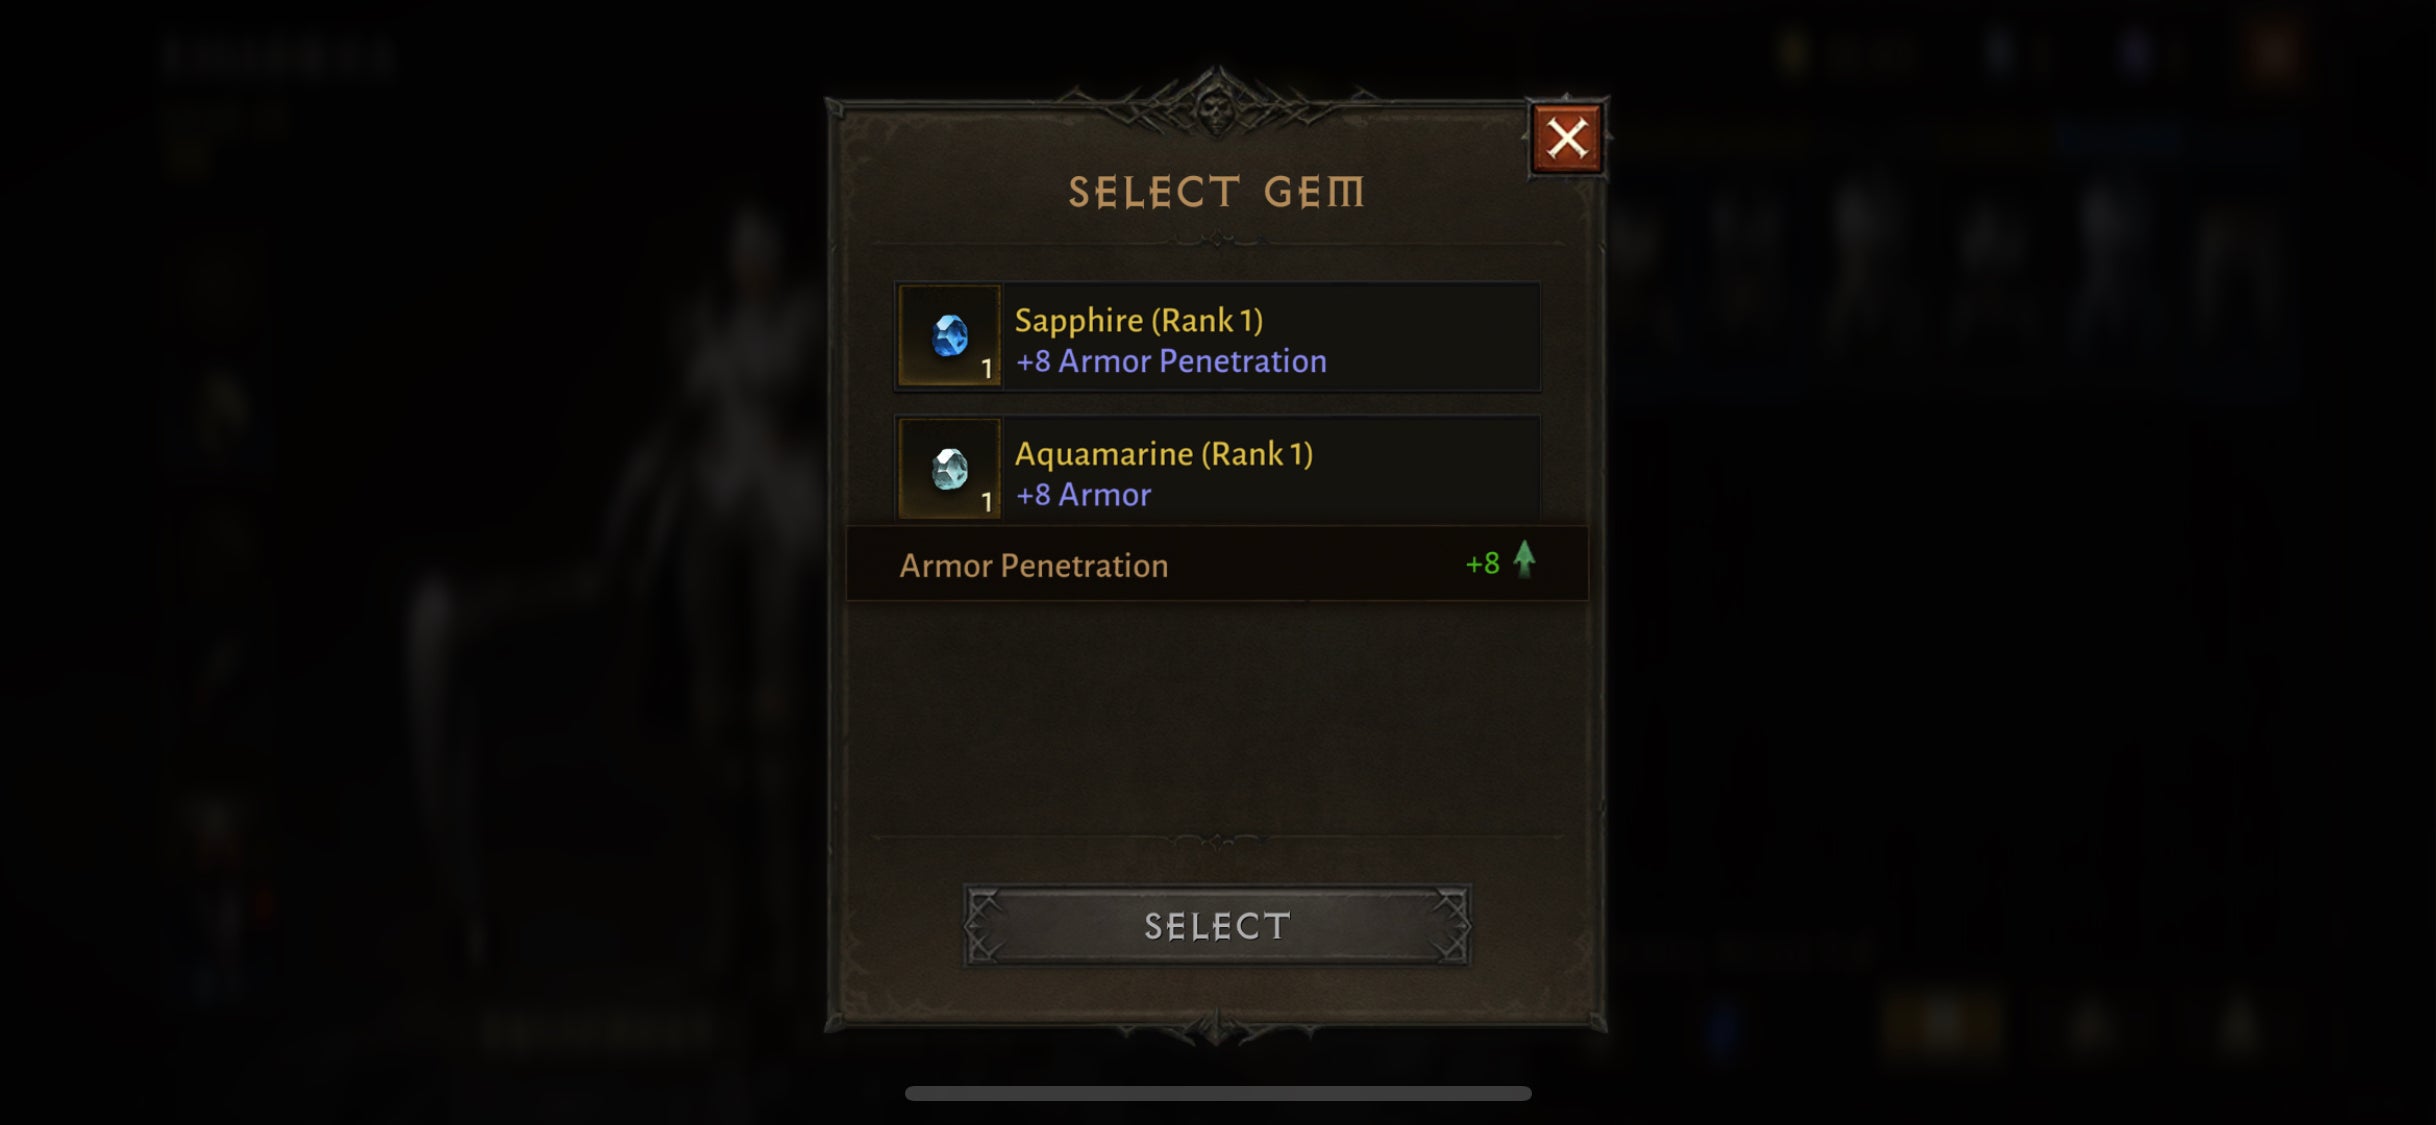 The secondary item gem slotting screen in Diablo Immortal, showing the blue gems Sapphire and Aquamarine